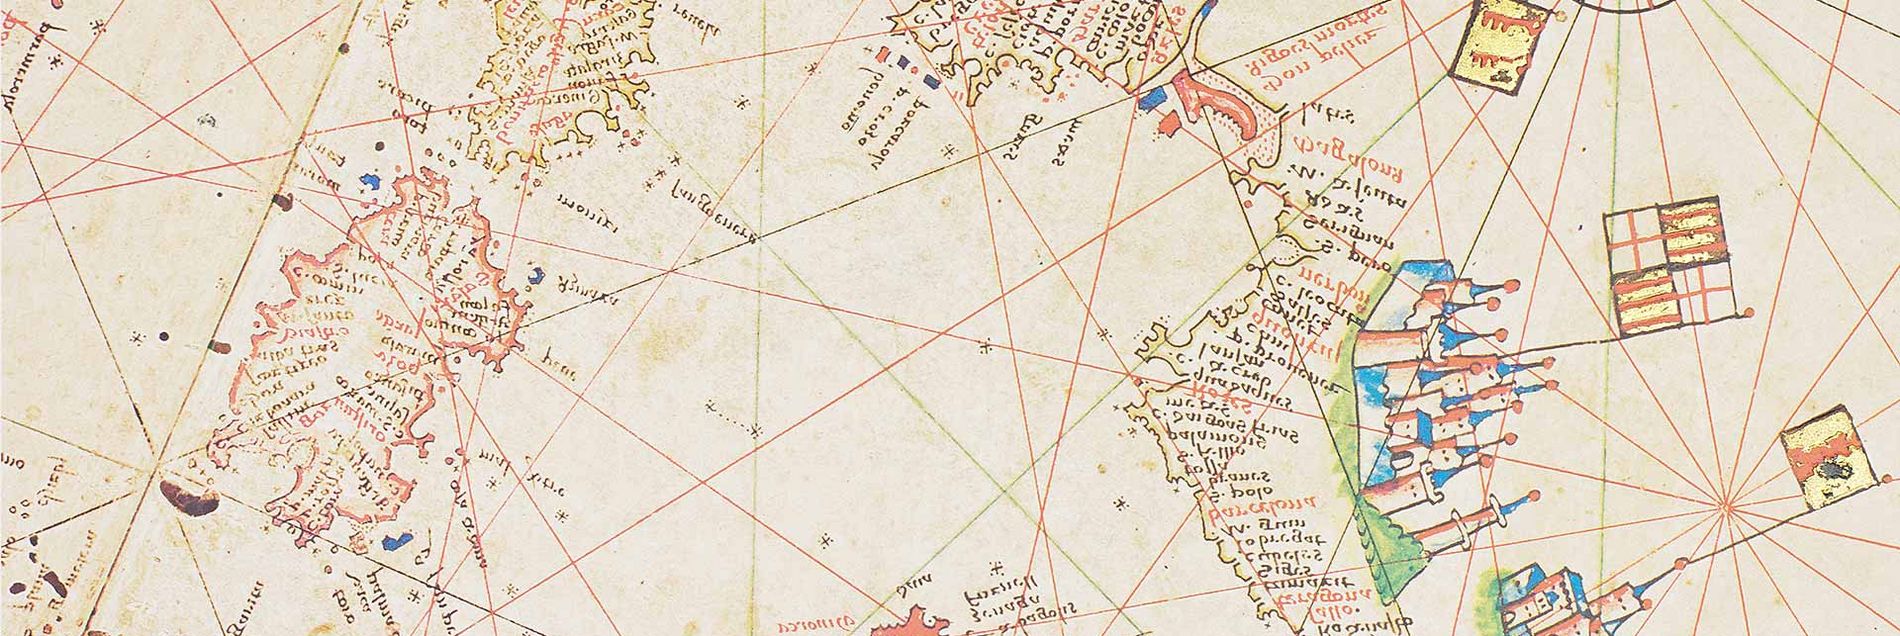 <i>“The latest geographical findings in four magnificently illuminated portolan maps”</i>